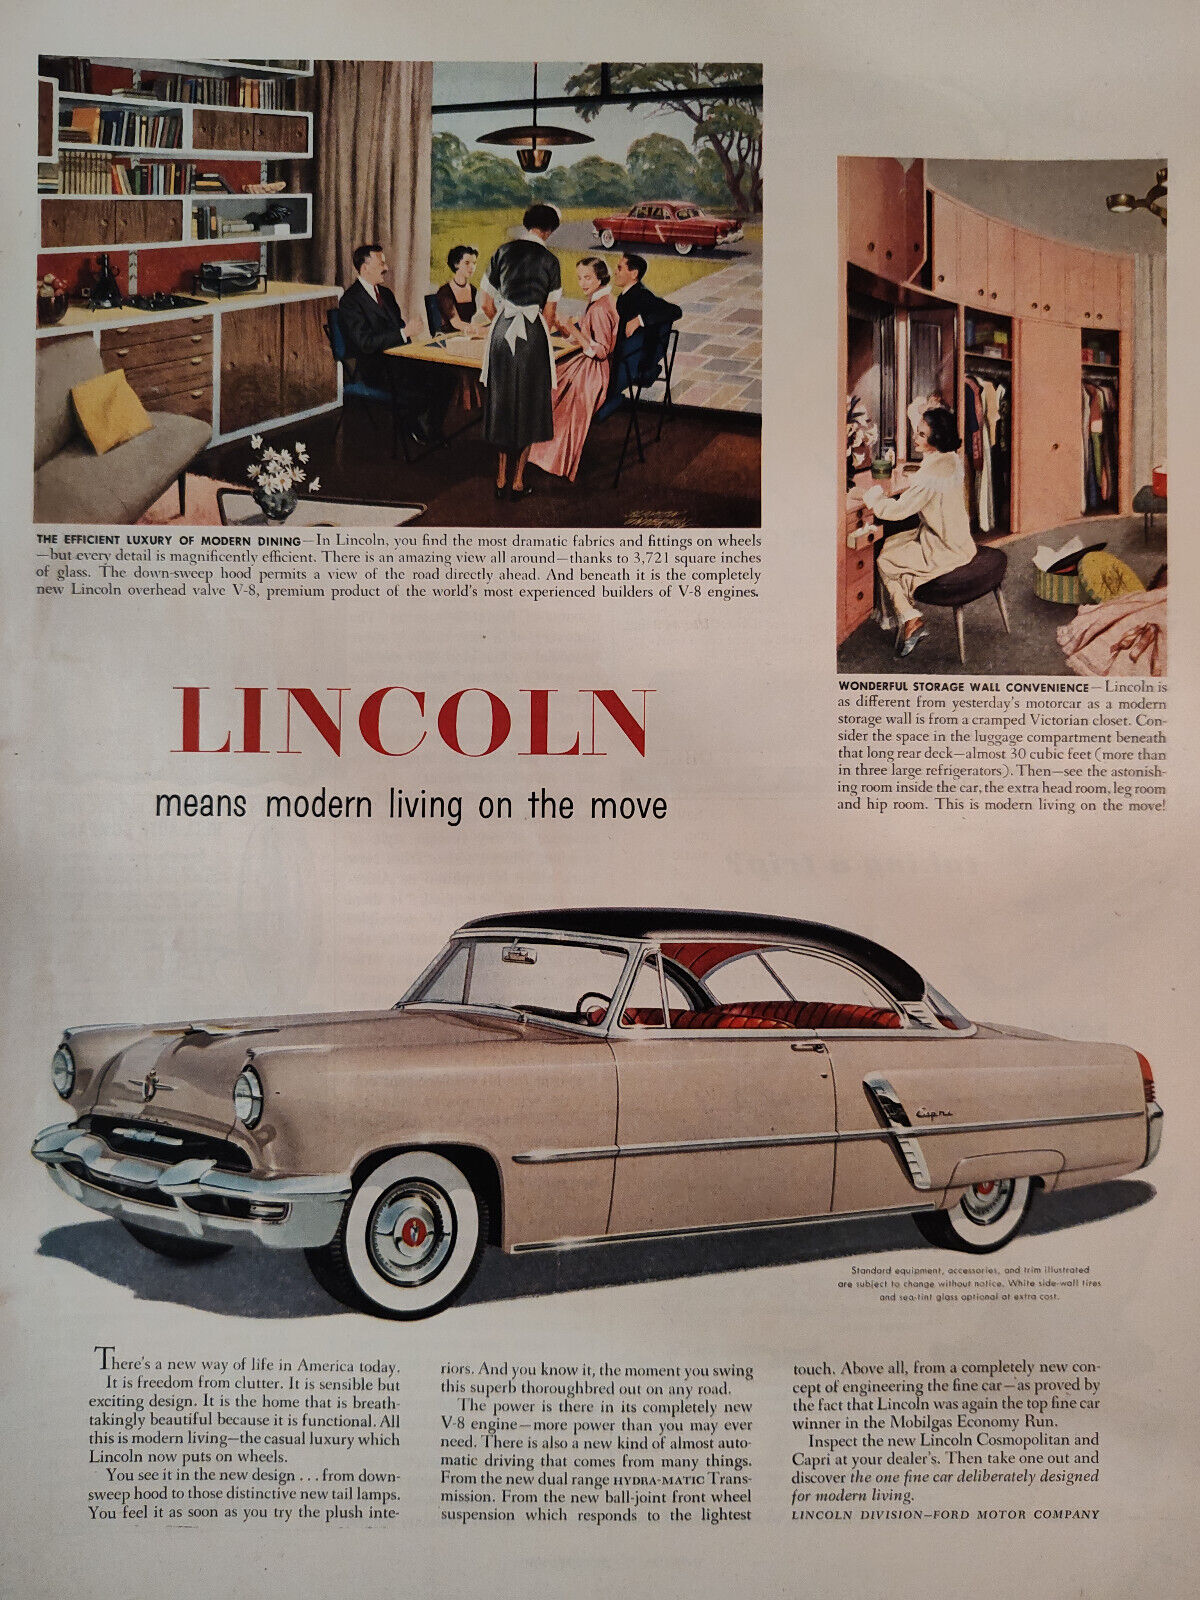 1952 September Holiday Advertisement LINCOLN Means Modern Living on the Move